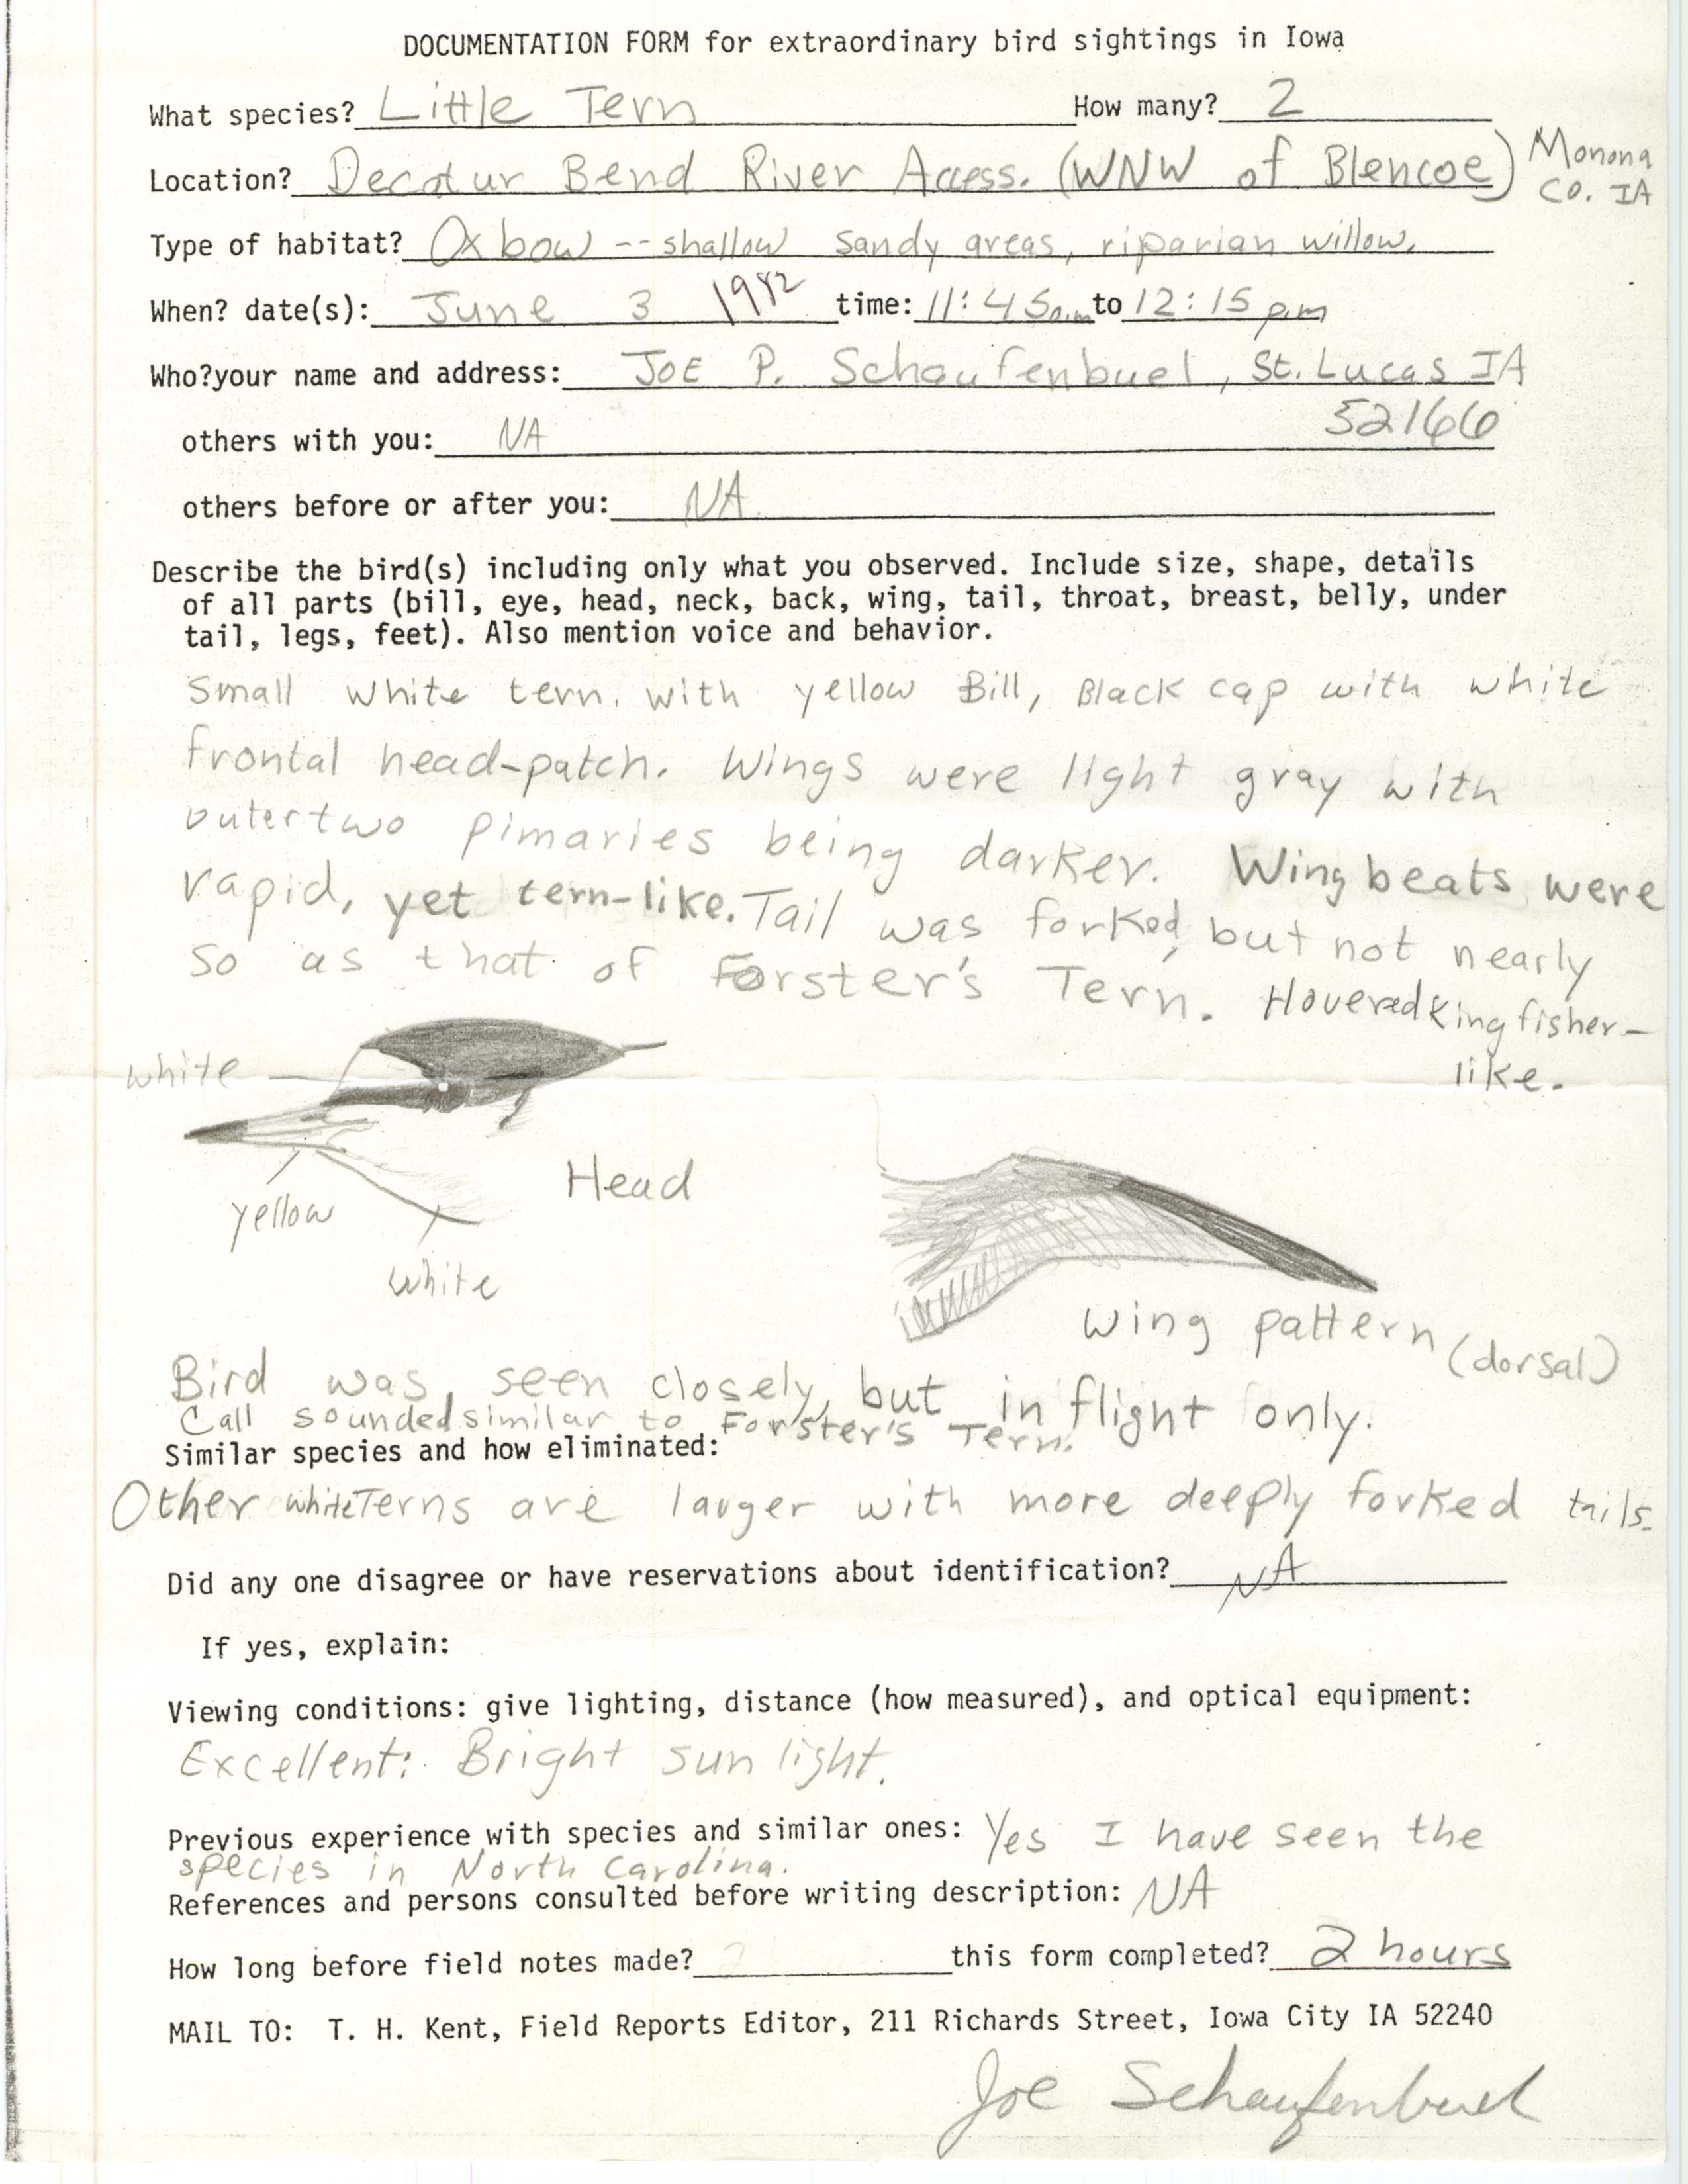 Rare bird documentation form for Little Tern at Decatur Bend River Access, 1982